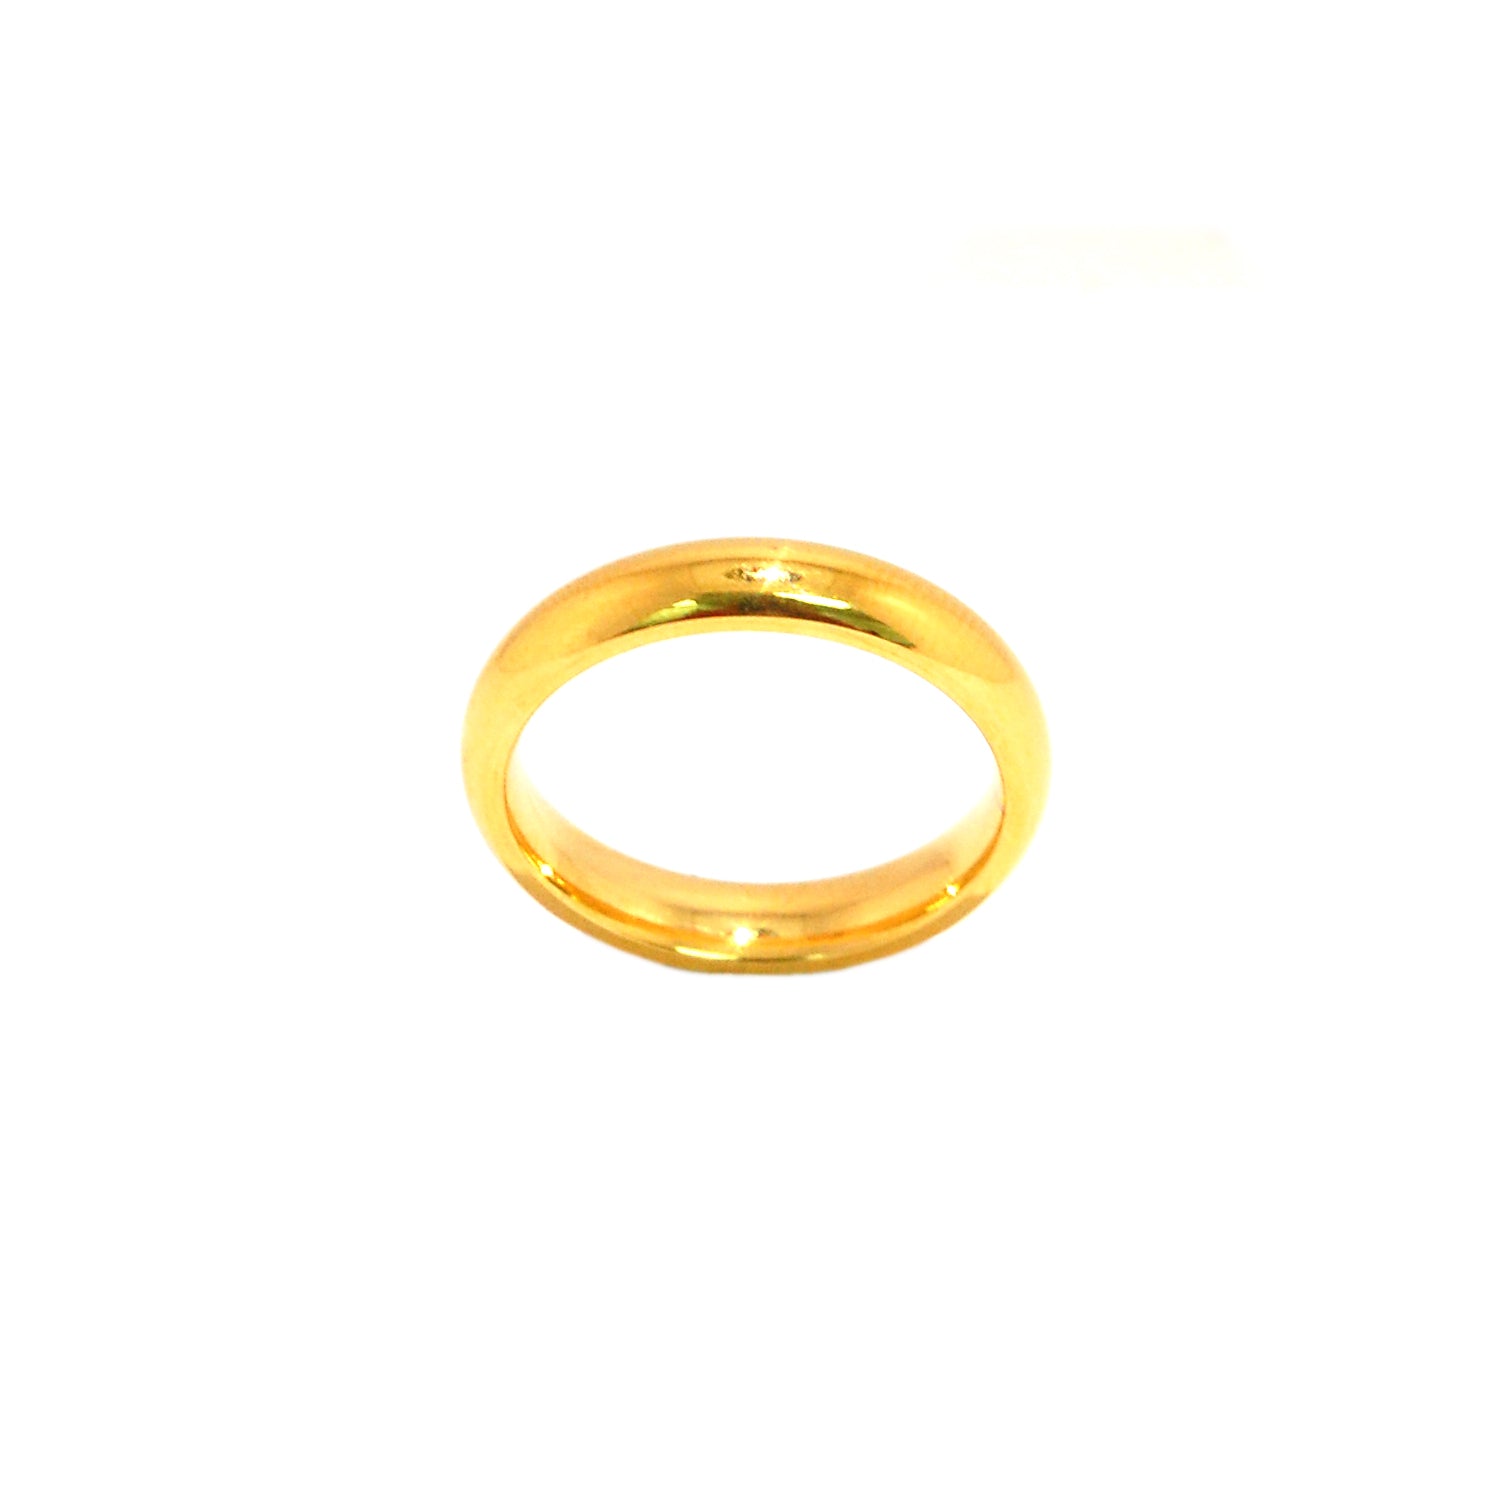 ESR 7802: Alexis Gold Plated Glossy Plain Comfort Fit Band